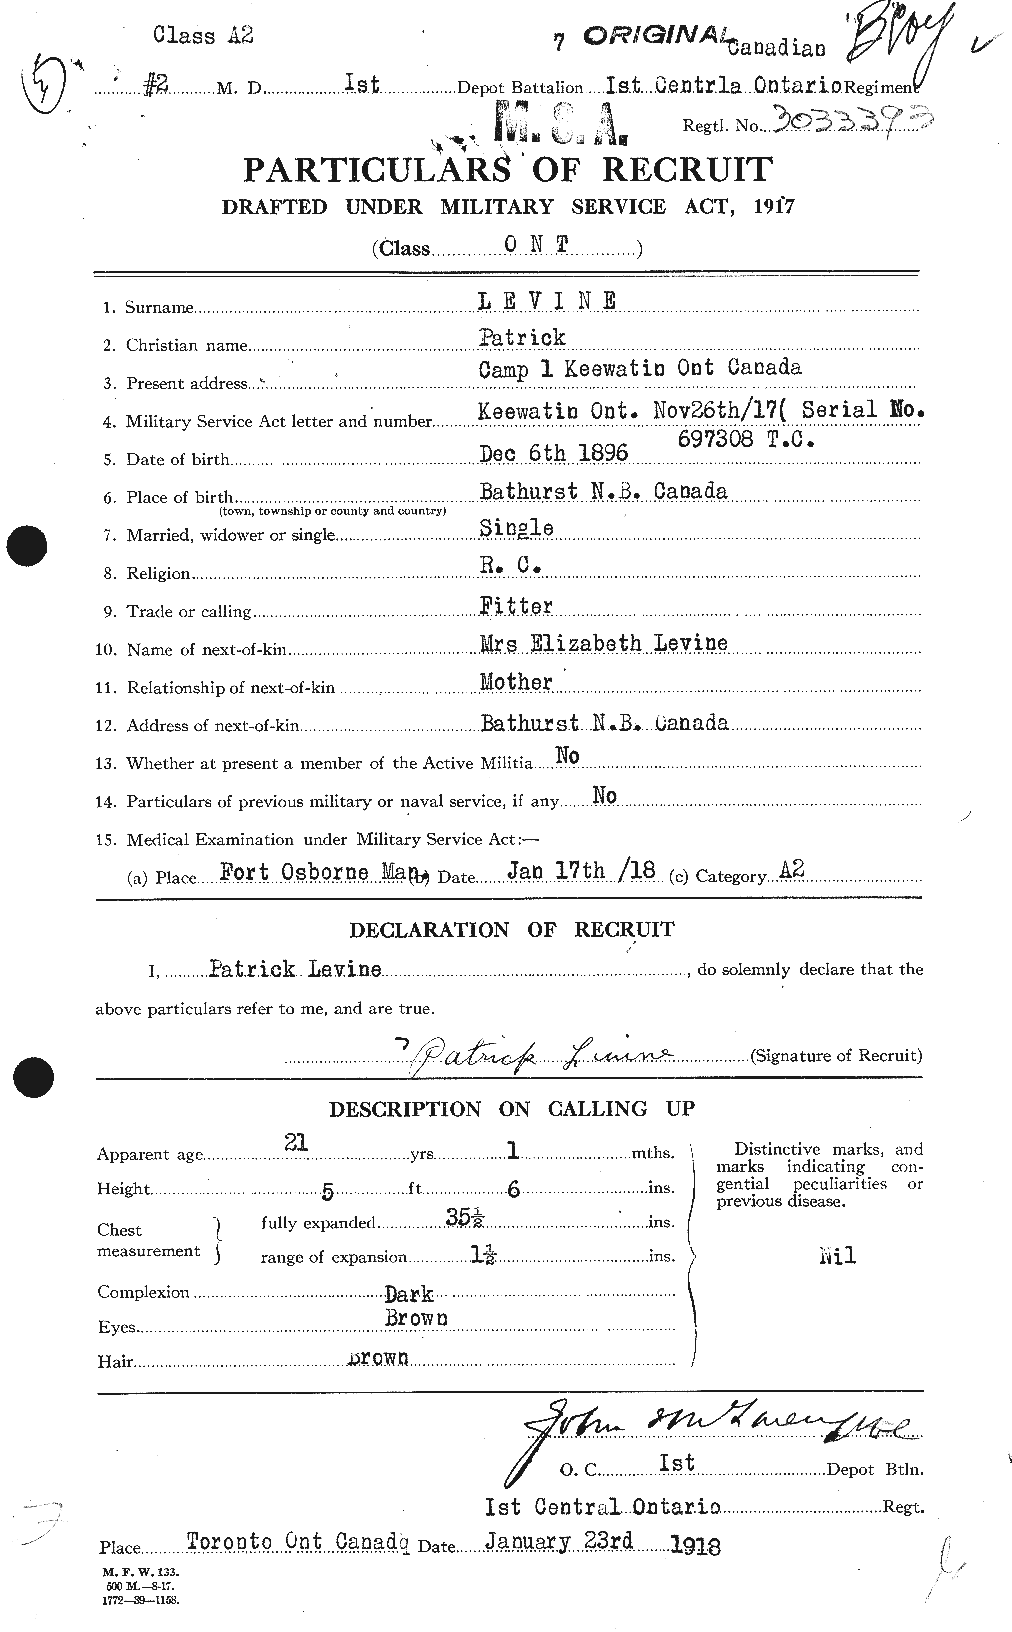 Personnel Records of the First World War - CEF 462703a